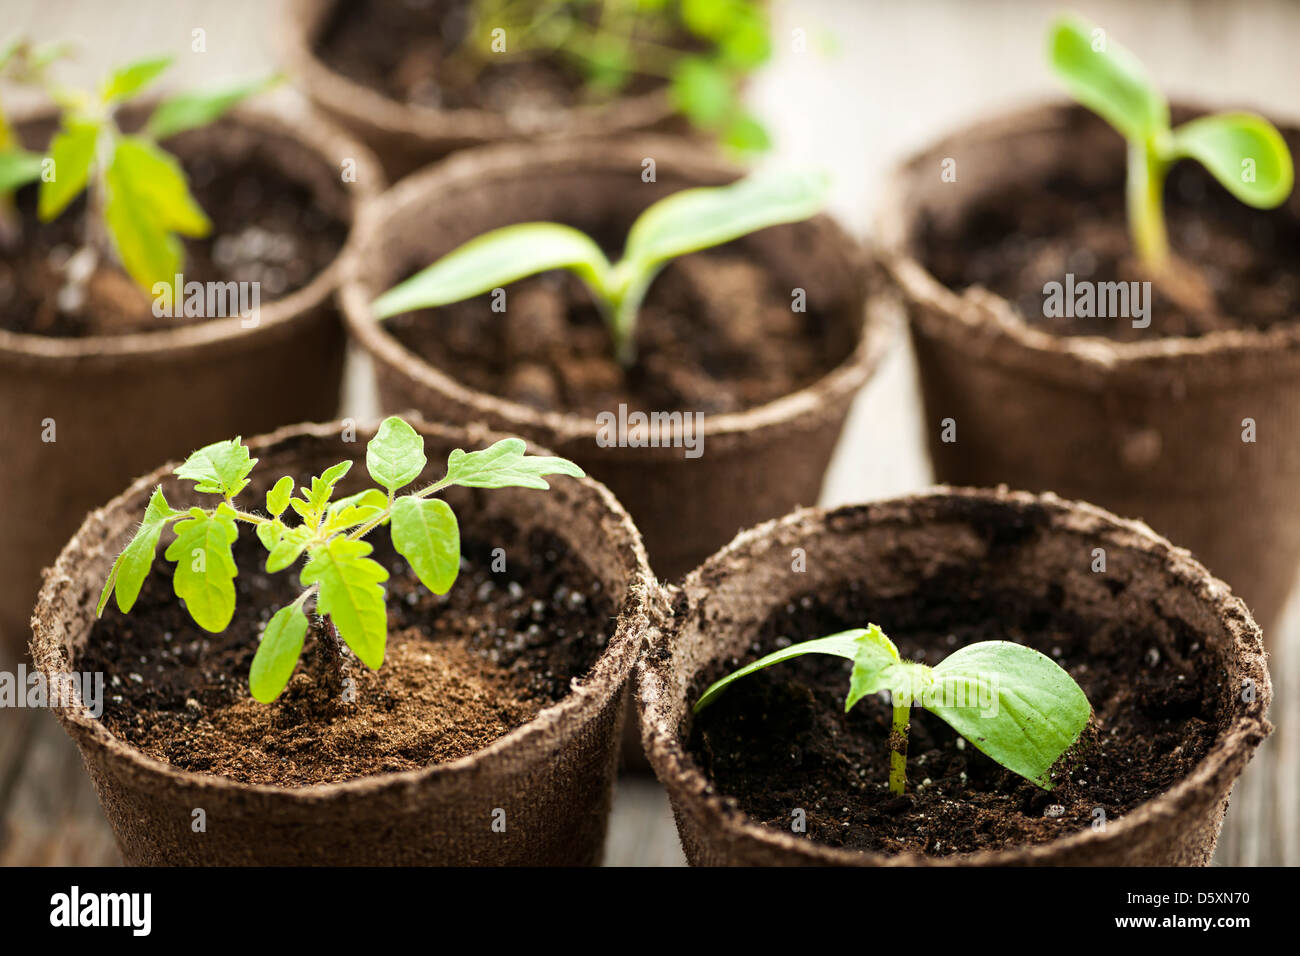 Potted seedlings growing in biodegradable peat moss pots Stock Photo